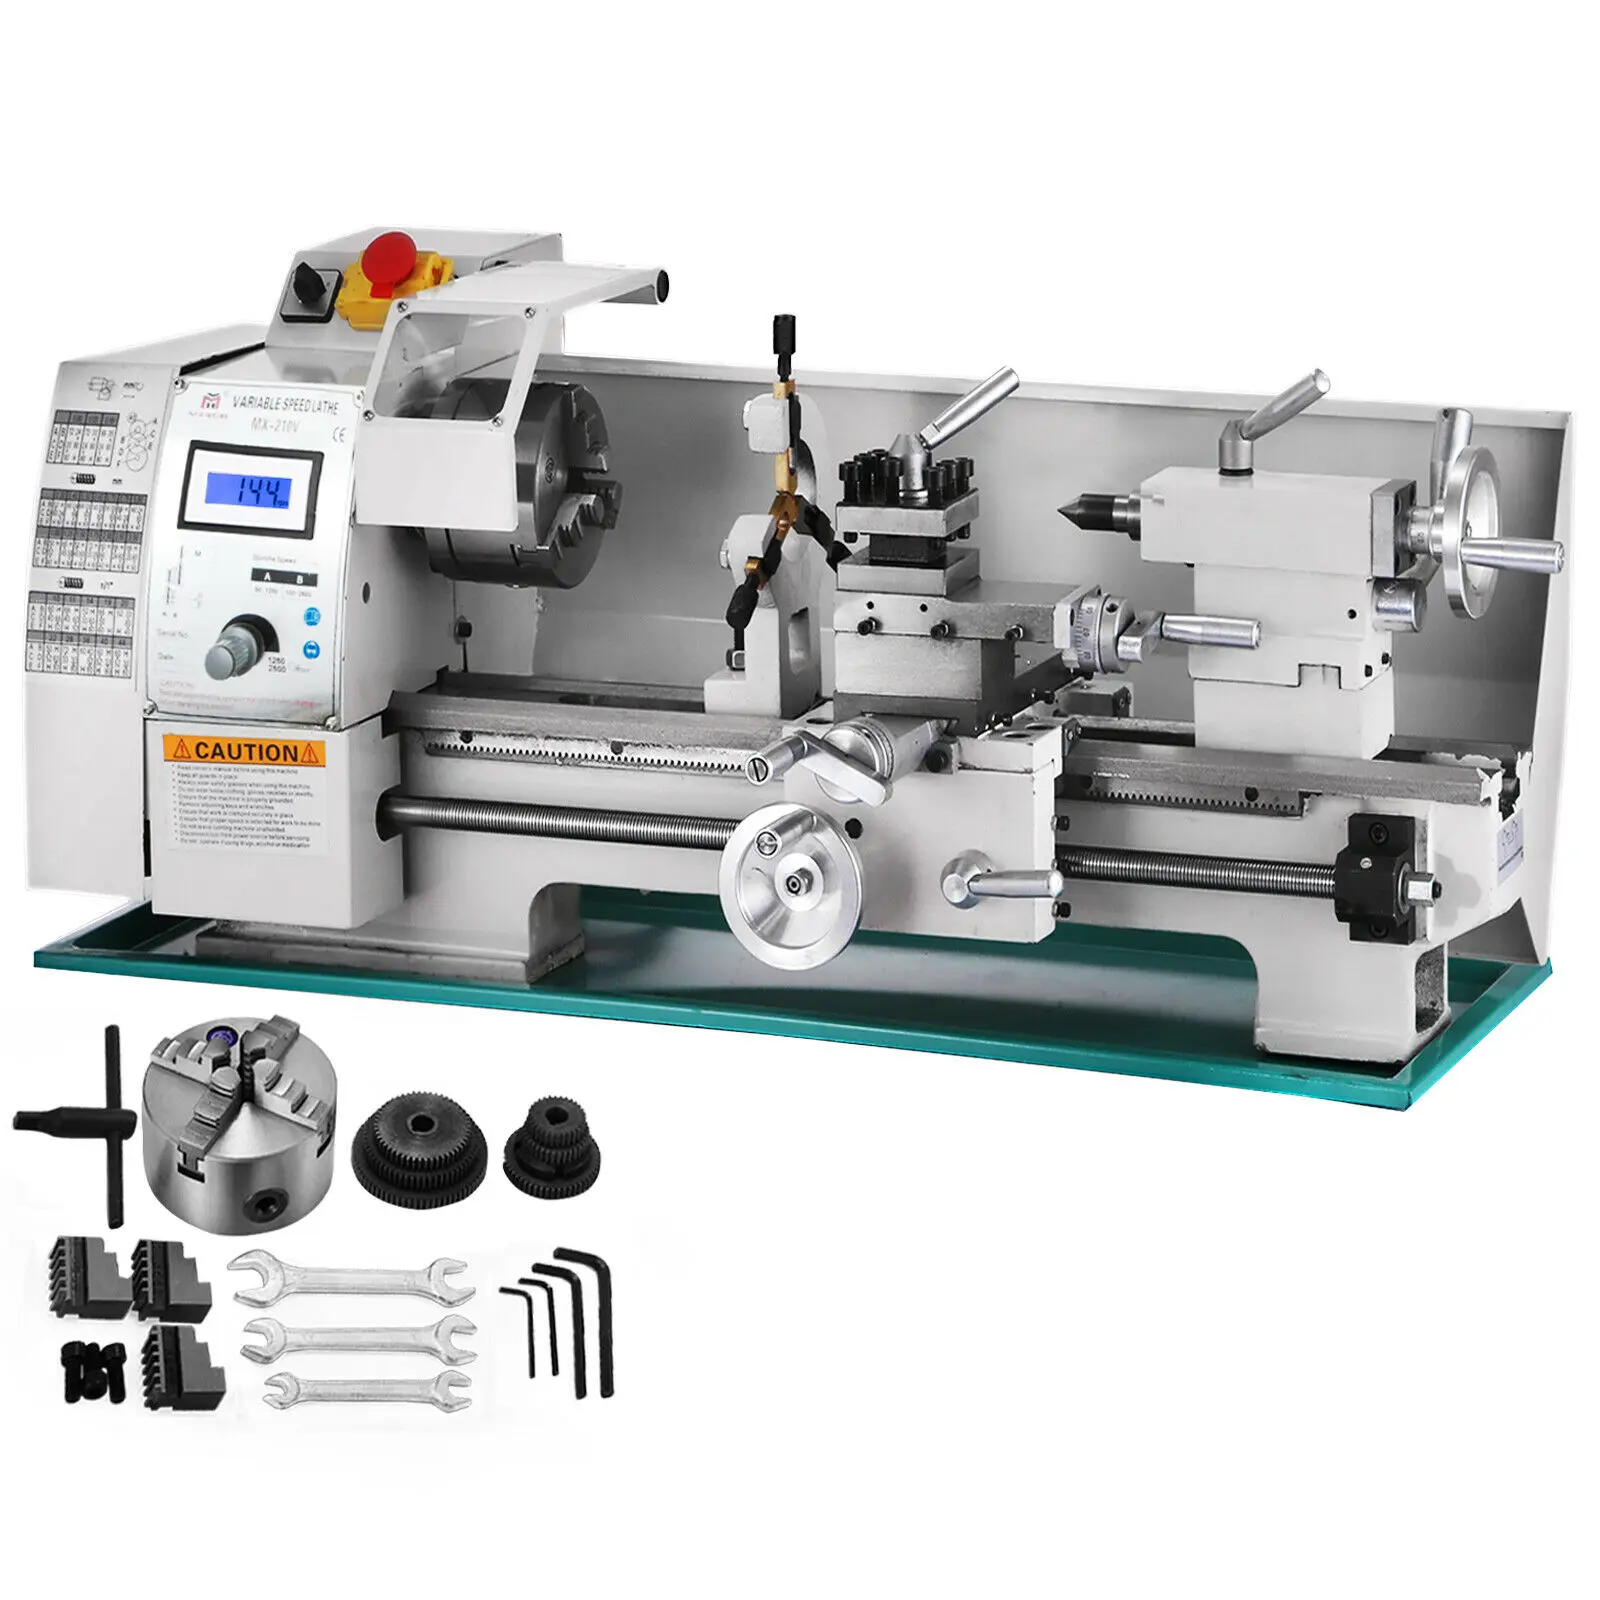 

750W Metal Lathe Processing Variable Speed high-Precision Shop Benchtop Variable Speed Mini Lathe with Tools,Center Bracke